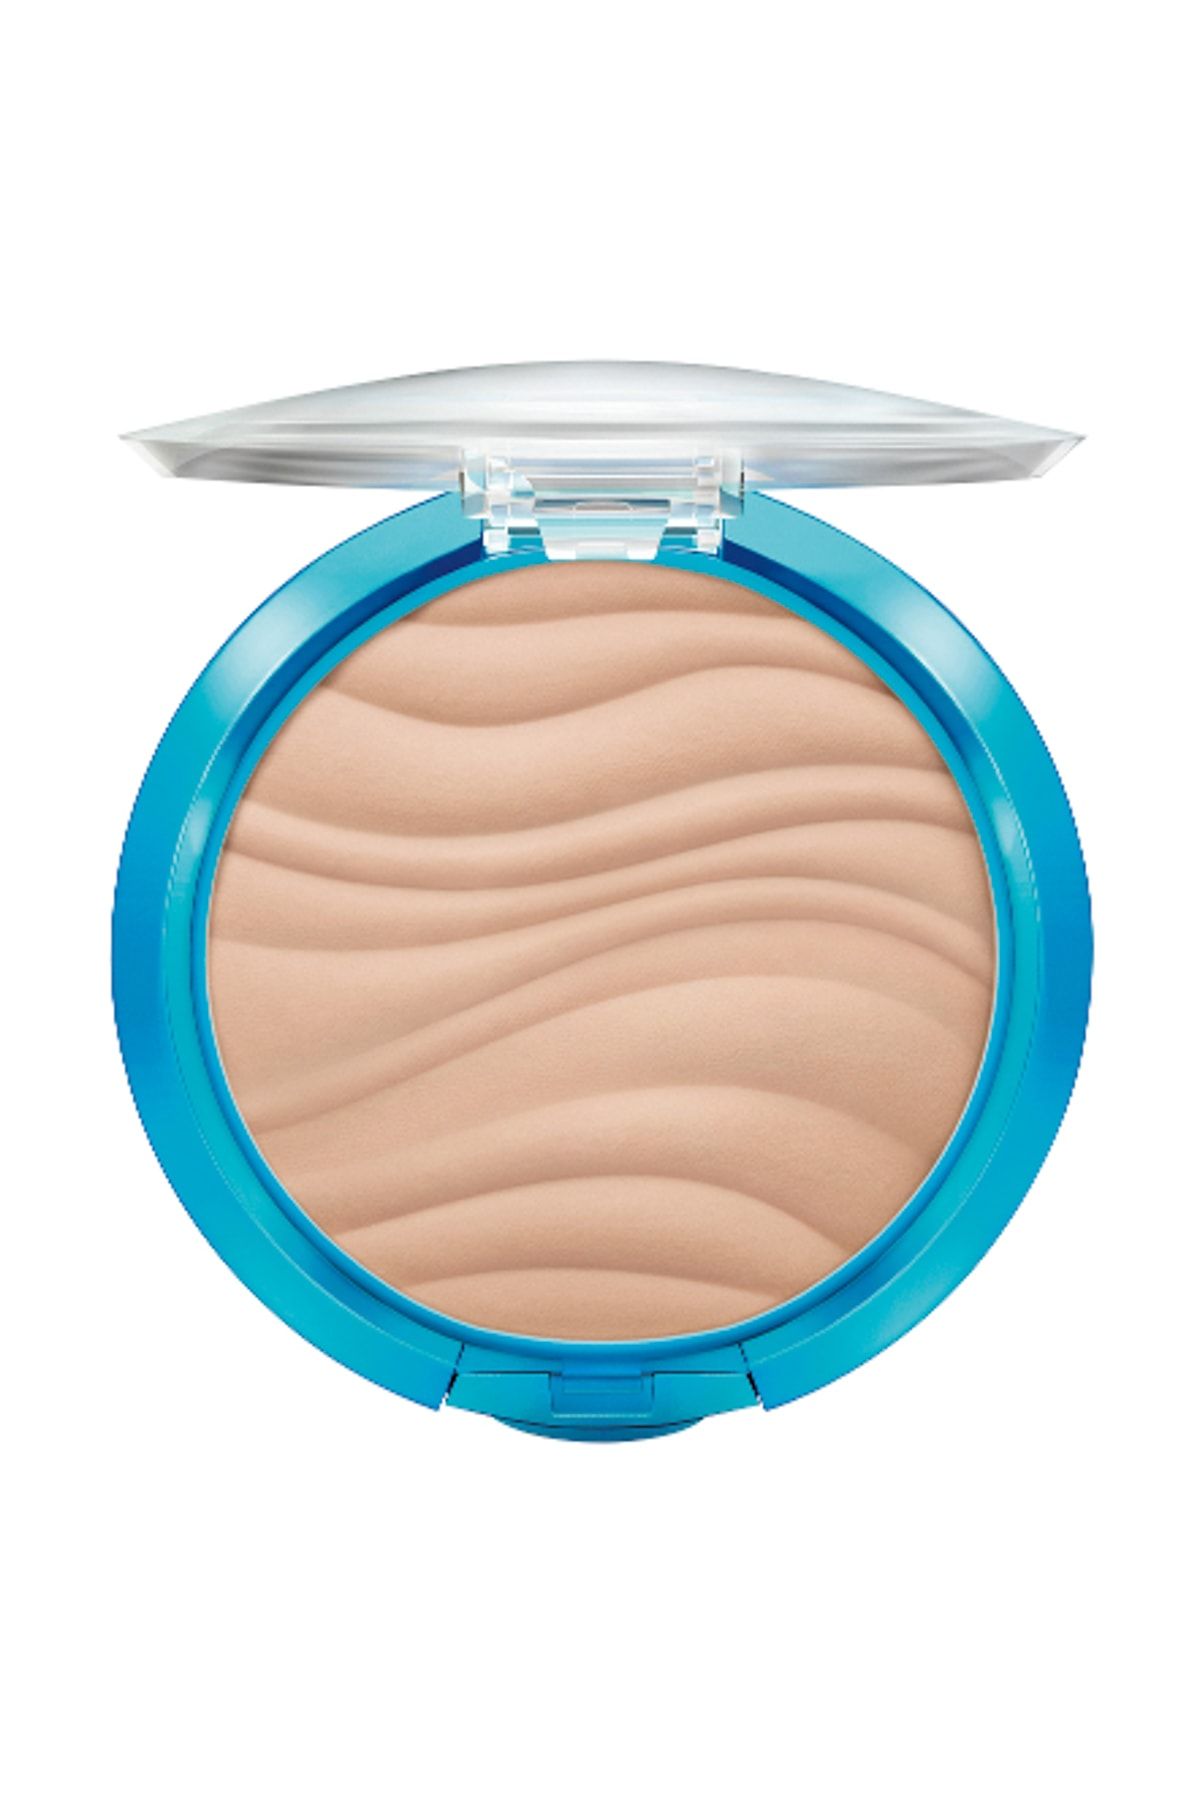 Physicians Formula Pudra - Mineral Wear Airbrushing Powder Beige Spf 30 7,5 g 044386075887